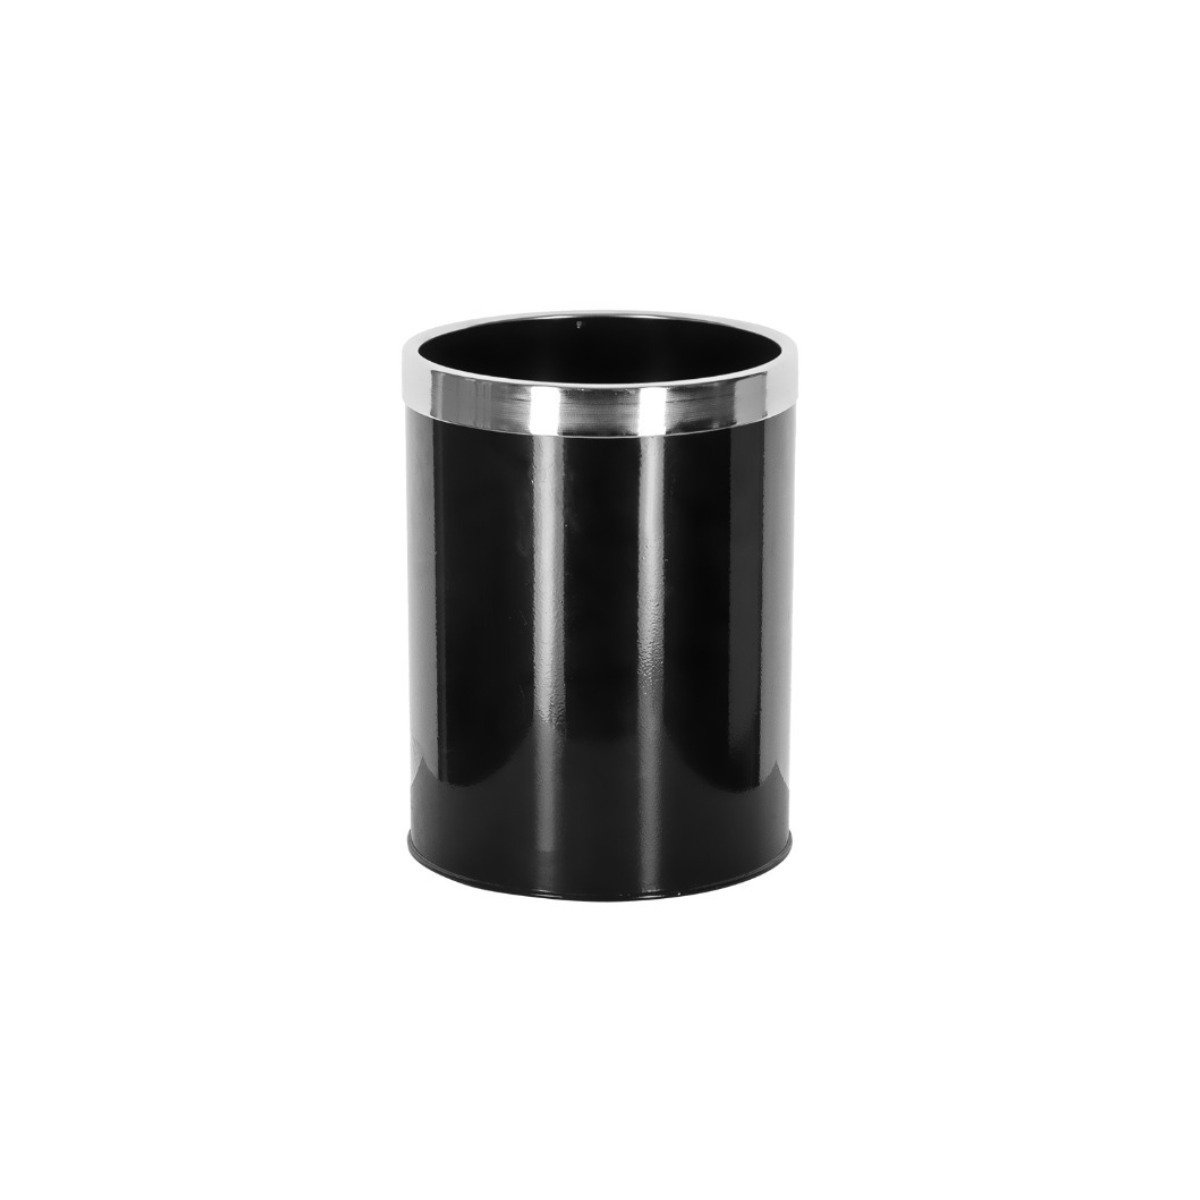 AB-205 Classic Trash Can product logo